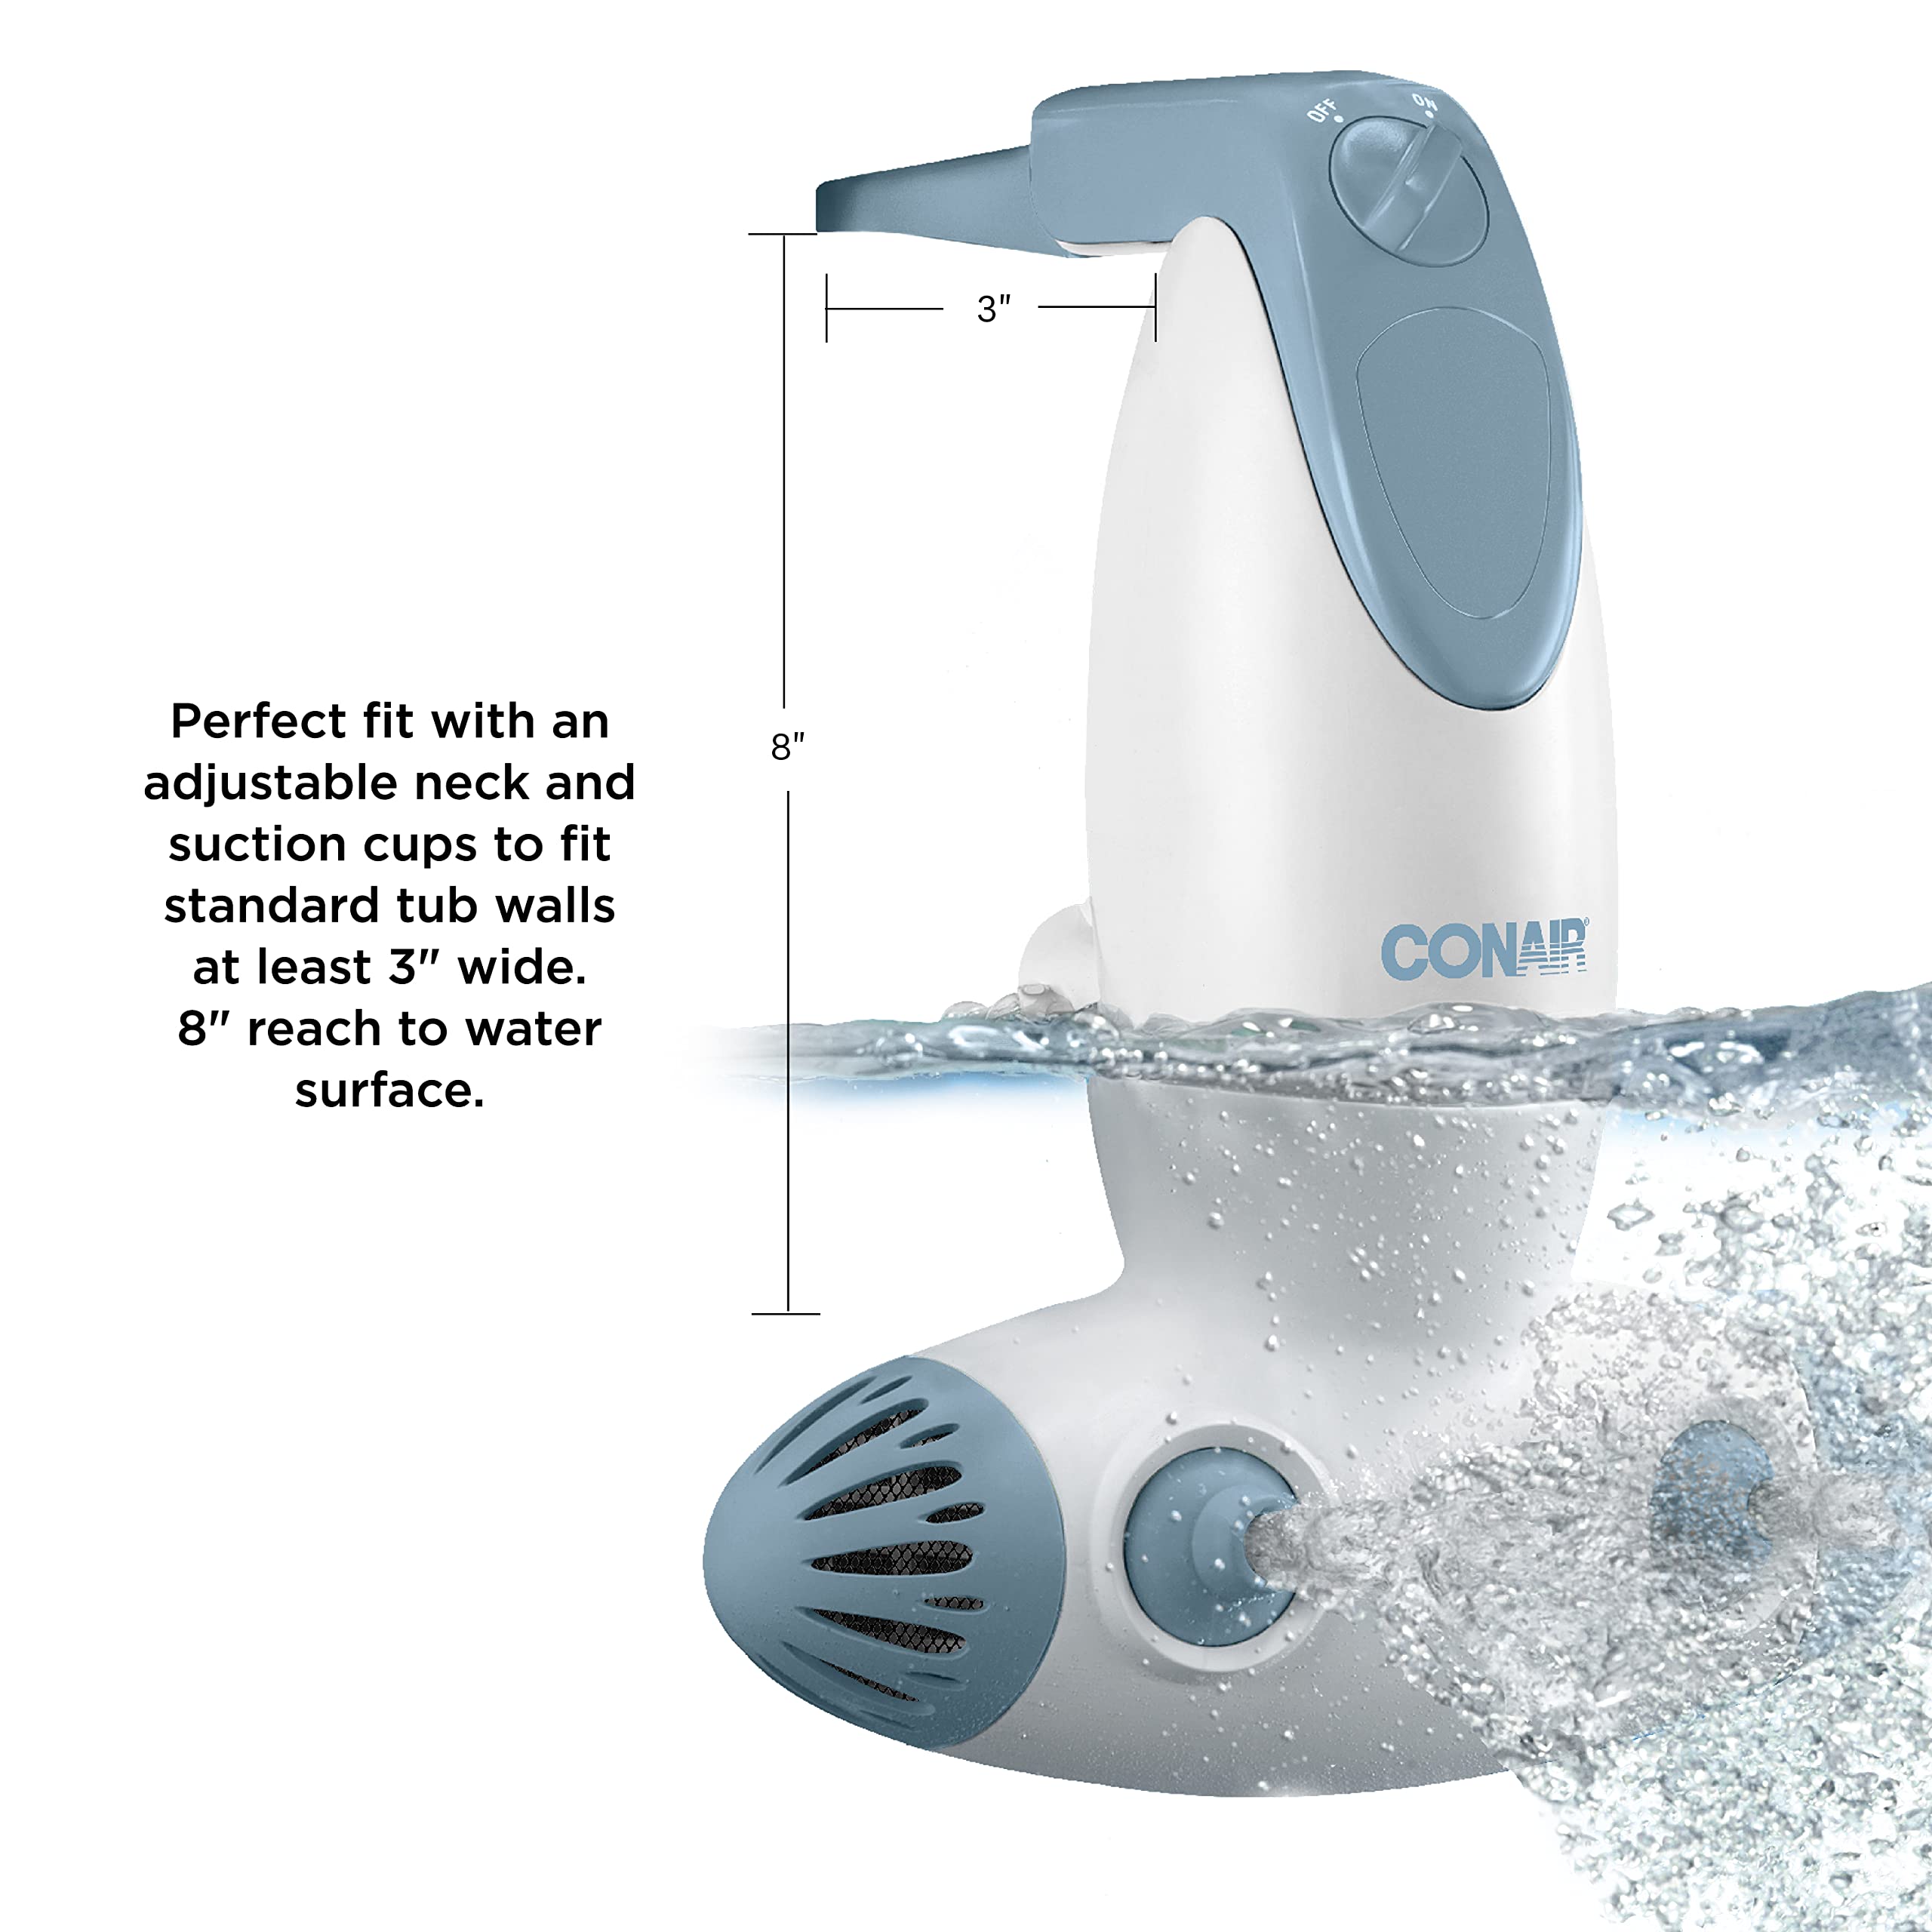 Conair Portable Bath Spa with Dual Hydro Jets for Tub, Bath Spa Jet for Tub Creates Soothing Bubbles and/or Massage, Spa Bath for at Home Use